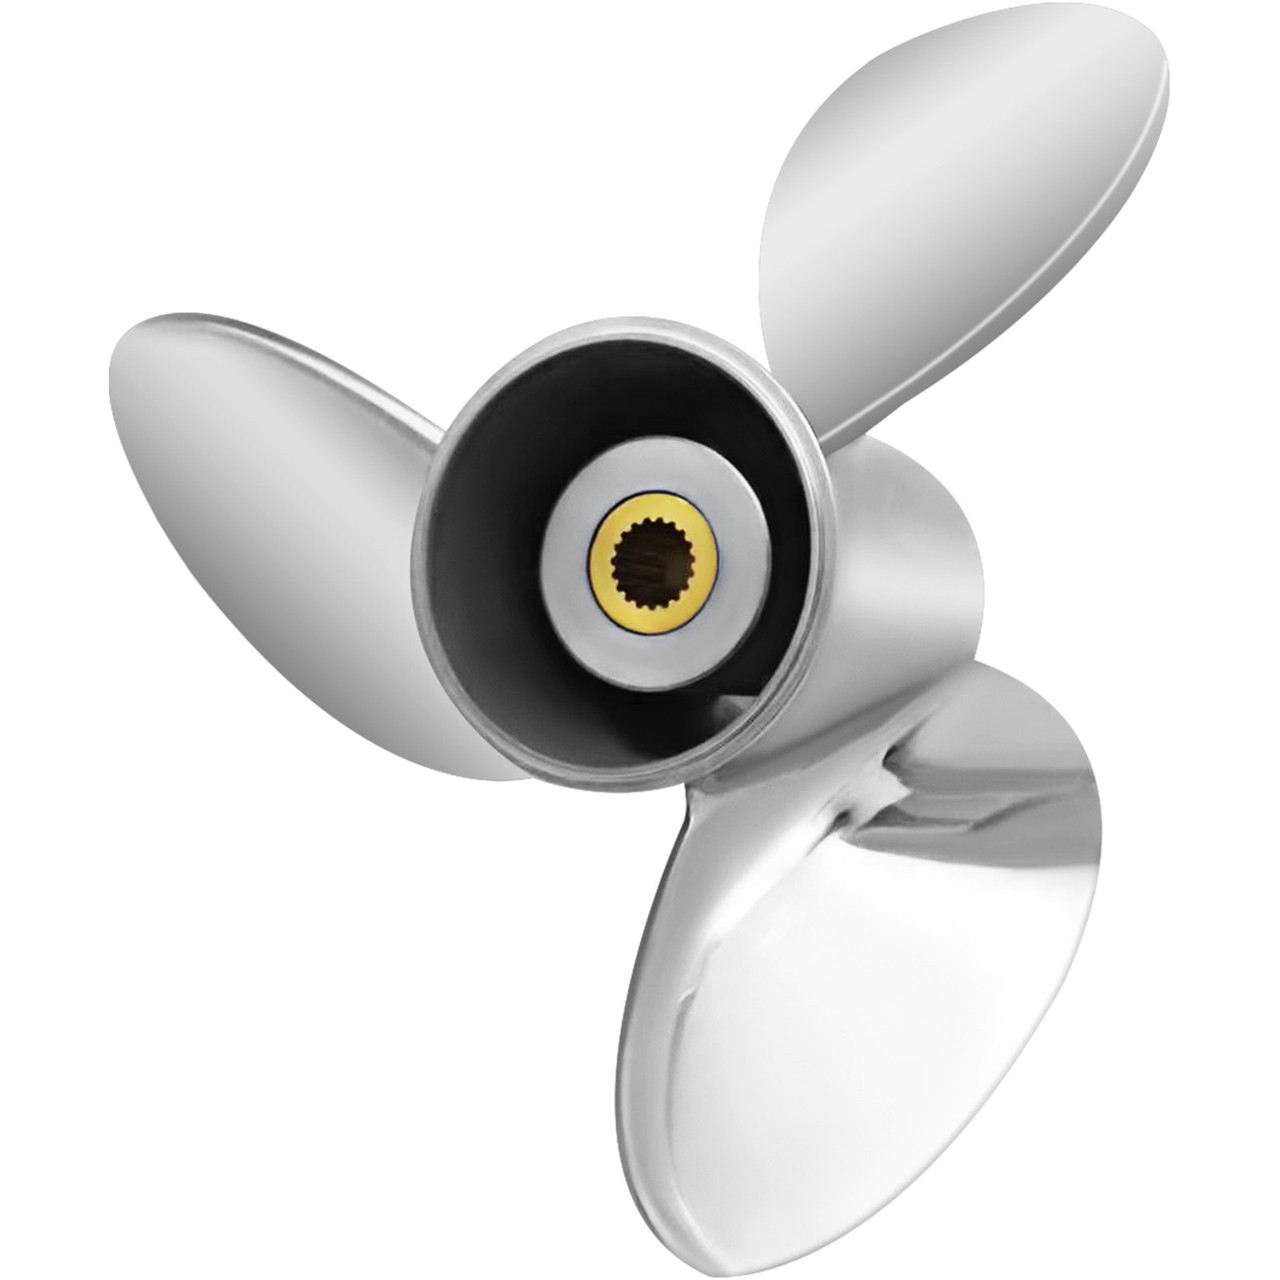 Outboard Propeller, Replace for OEM 3860709, 3-Blade 14.5" x 21" Pitch Steel Boat Propeller, Compatible with Volvo Penta SX Drive All Models, w/ 19 Tooth Splines, RH